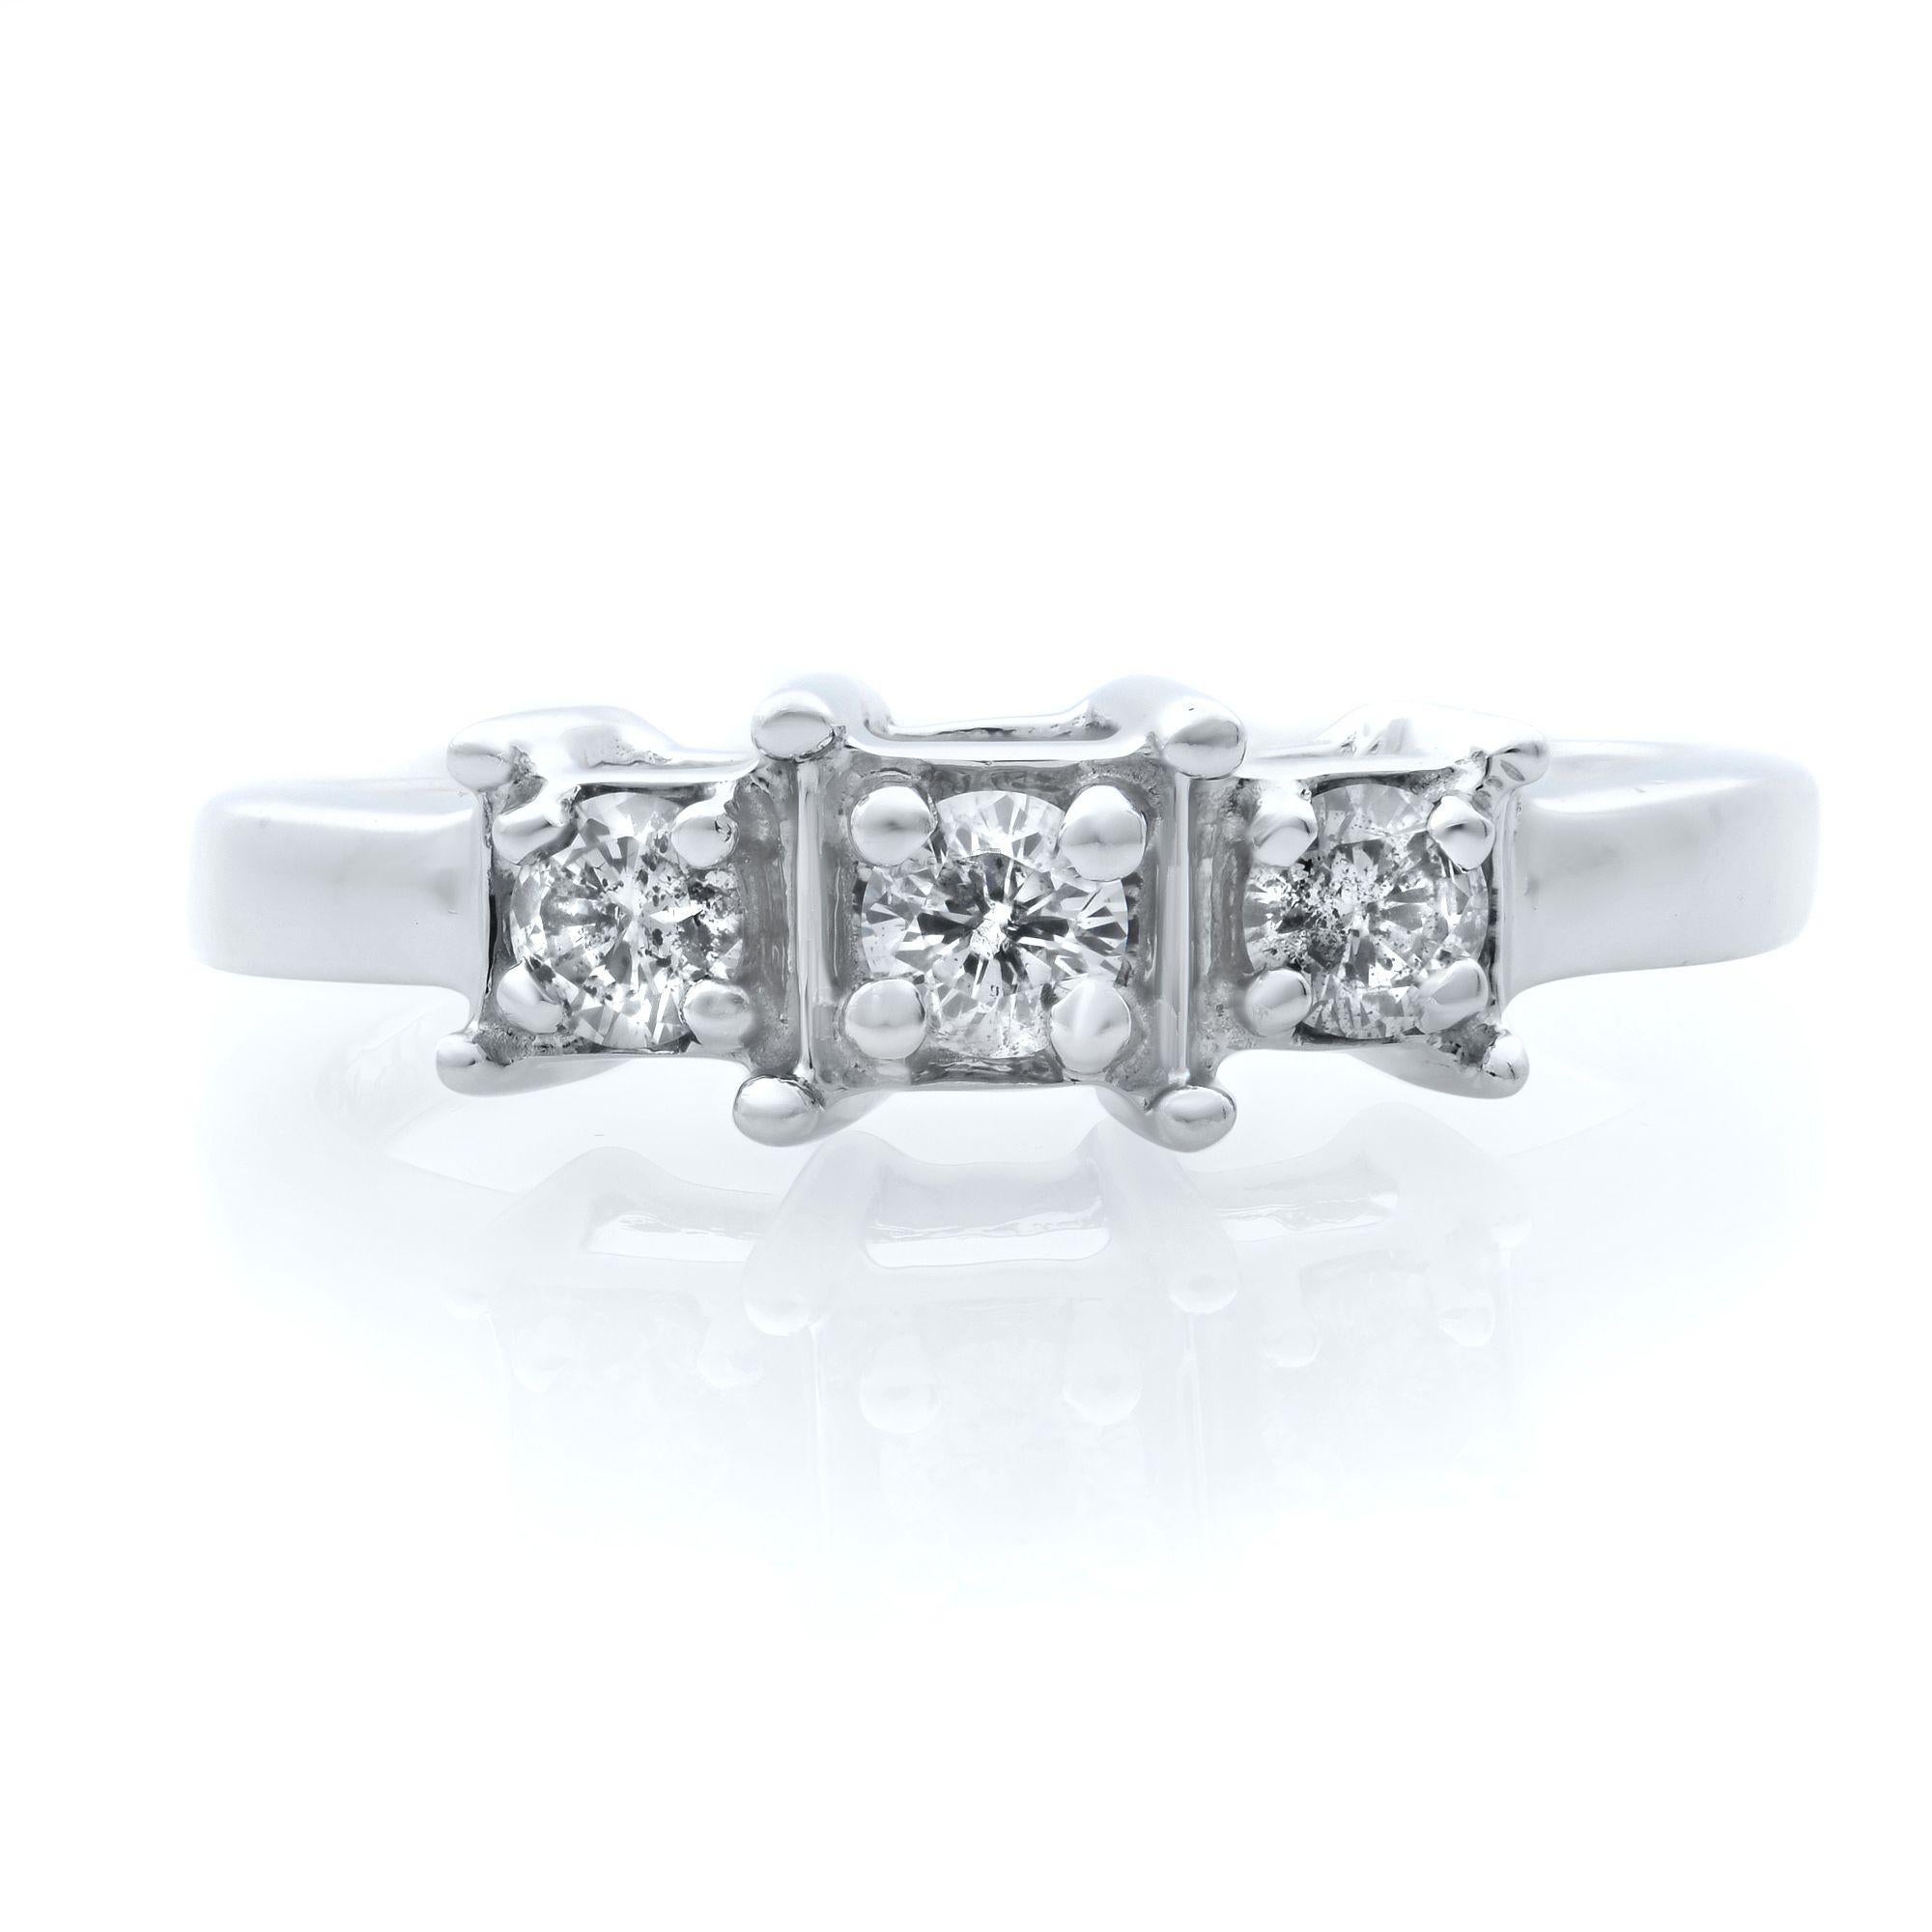 This stunning engagement ring features a round brilliant cut diamond prong set at the top, with a smaller round diamond prong set on either side to complete the three-stone setting. The setting is square looking, bu the stones are round. Total carat